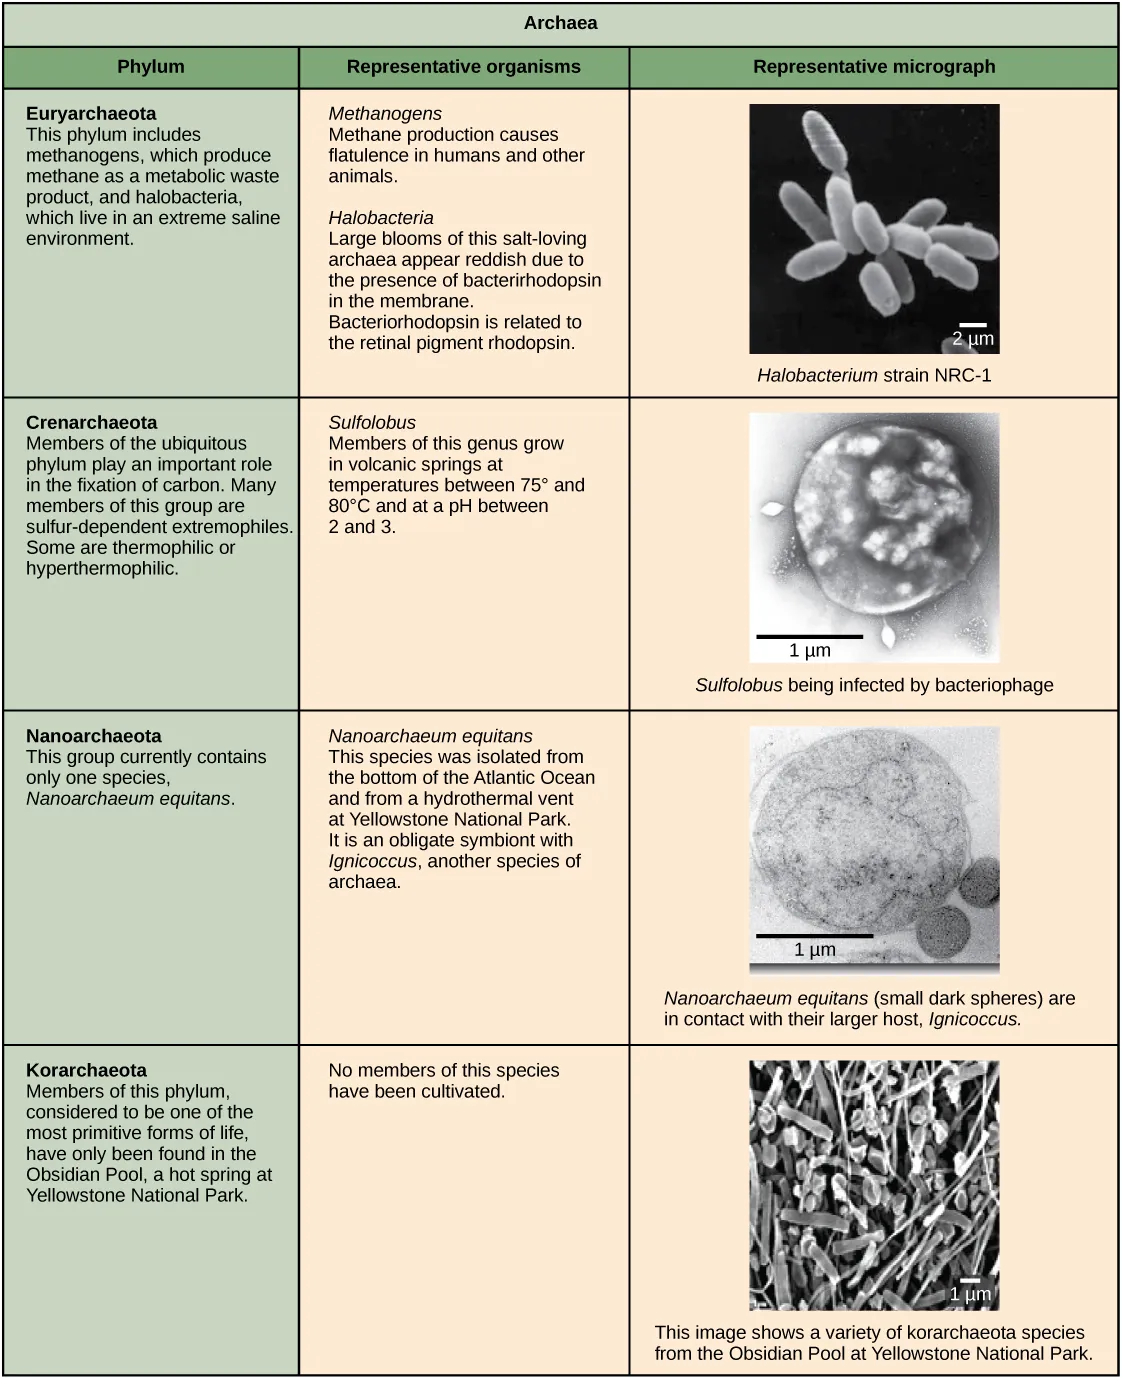 Characteristics of the four phyla of archaea are described. Euryarchaeotes includes methanogens, which produce methane as a metabolic waste product, and halobacteria, which live in an extreme saline environment. Methanogens cause flatulence in humans and other animals. Halobacteria can grow in large blooms that appear reddish, due to the presence of bacterirhodopsin in the membrane. Bacteriorhodopsin is related to the retinal pigment rhodopsin. Micrograph shows rod-shaped Halobacterium. Members of the ubiquitous Crenarchaeotes phylum play an important role in the fixation of carbon. Many members of this group are sulfur-dependent extremophiles. Some are thermophilic or hyperthermophilic. Micrograph shows cocci-shaped Sulfolobus, a genus which grows in volcanic springs at temperatures between 75° and 80°C and at a pH between 2 and 3. The phylum Nanoarchaeotes currently contains only one species, Nanoarchaeum equitans, which has been isolated from the bottom of the Atlantic Ocean, and from the a hydrothermal vent at Yellowstone National Park. It is an obligate symbiont with Ignococcus, another species of archaebacteria. Micrograph shows two small, round N. equitans cells attached to a larger Ignococcus cell. Korarchaeotes are considered to be one of the most primitive forms of life and so far have only been found in the Obsidian Pool, a hot spring at Yellowstone National Park. Micrograph shows a variety of specimens from this group which vary in shape.